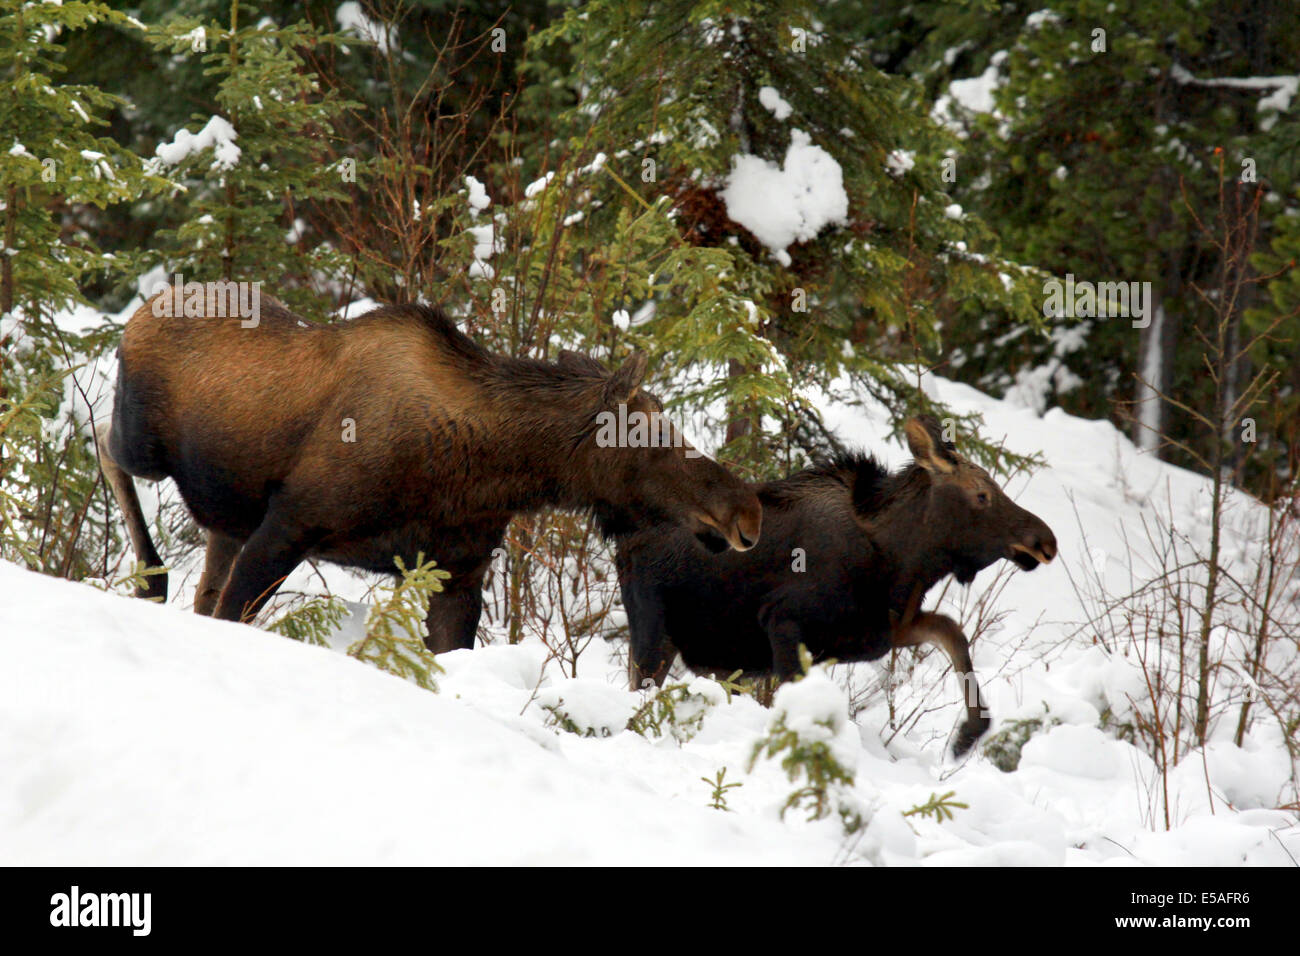 40,912.04231 Mother cow moose (Alces alces, Bovidae) and her baby calf walking in winter snow, conifer tree forest. Stock Photo